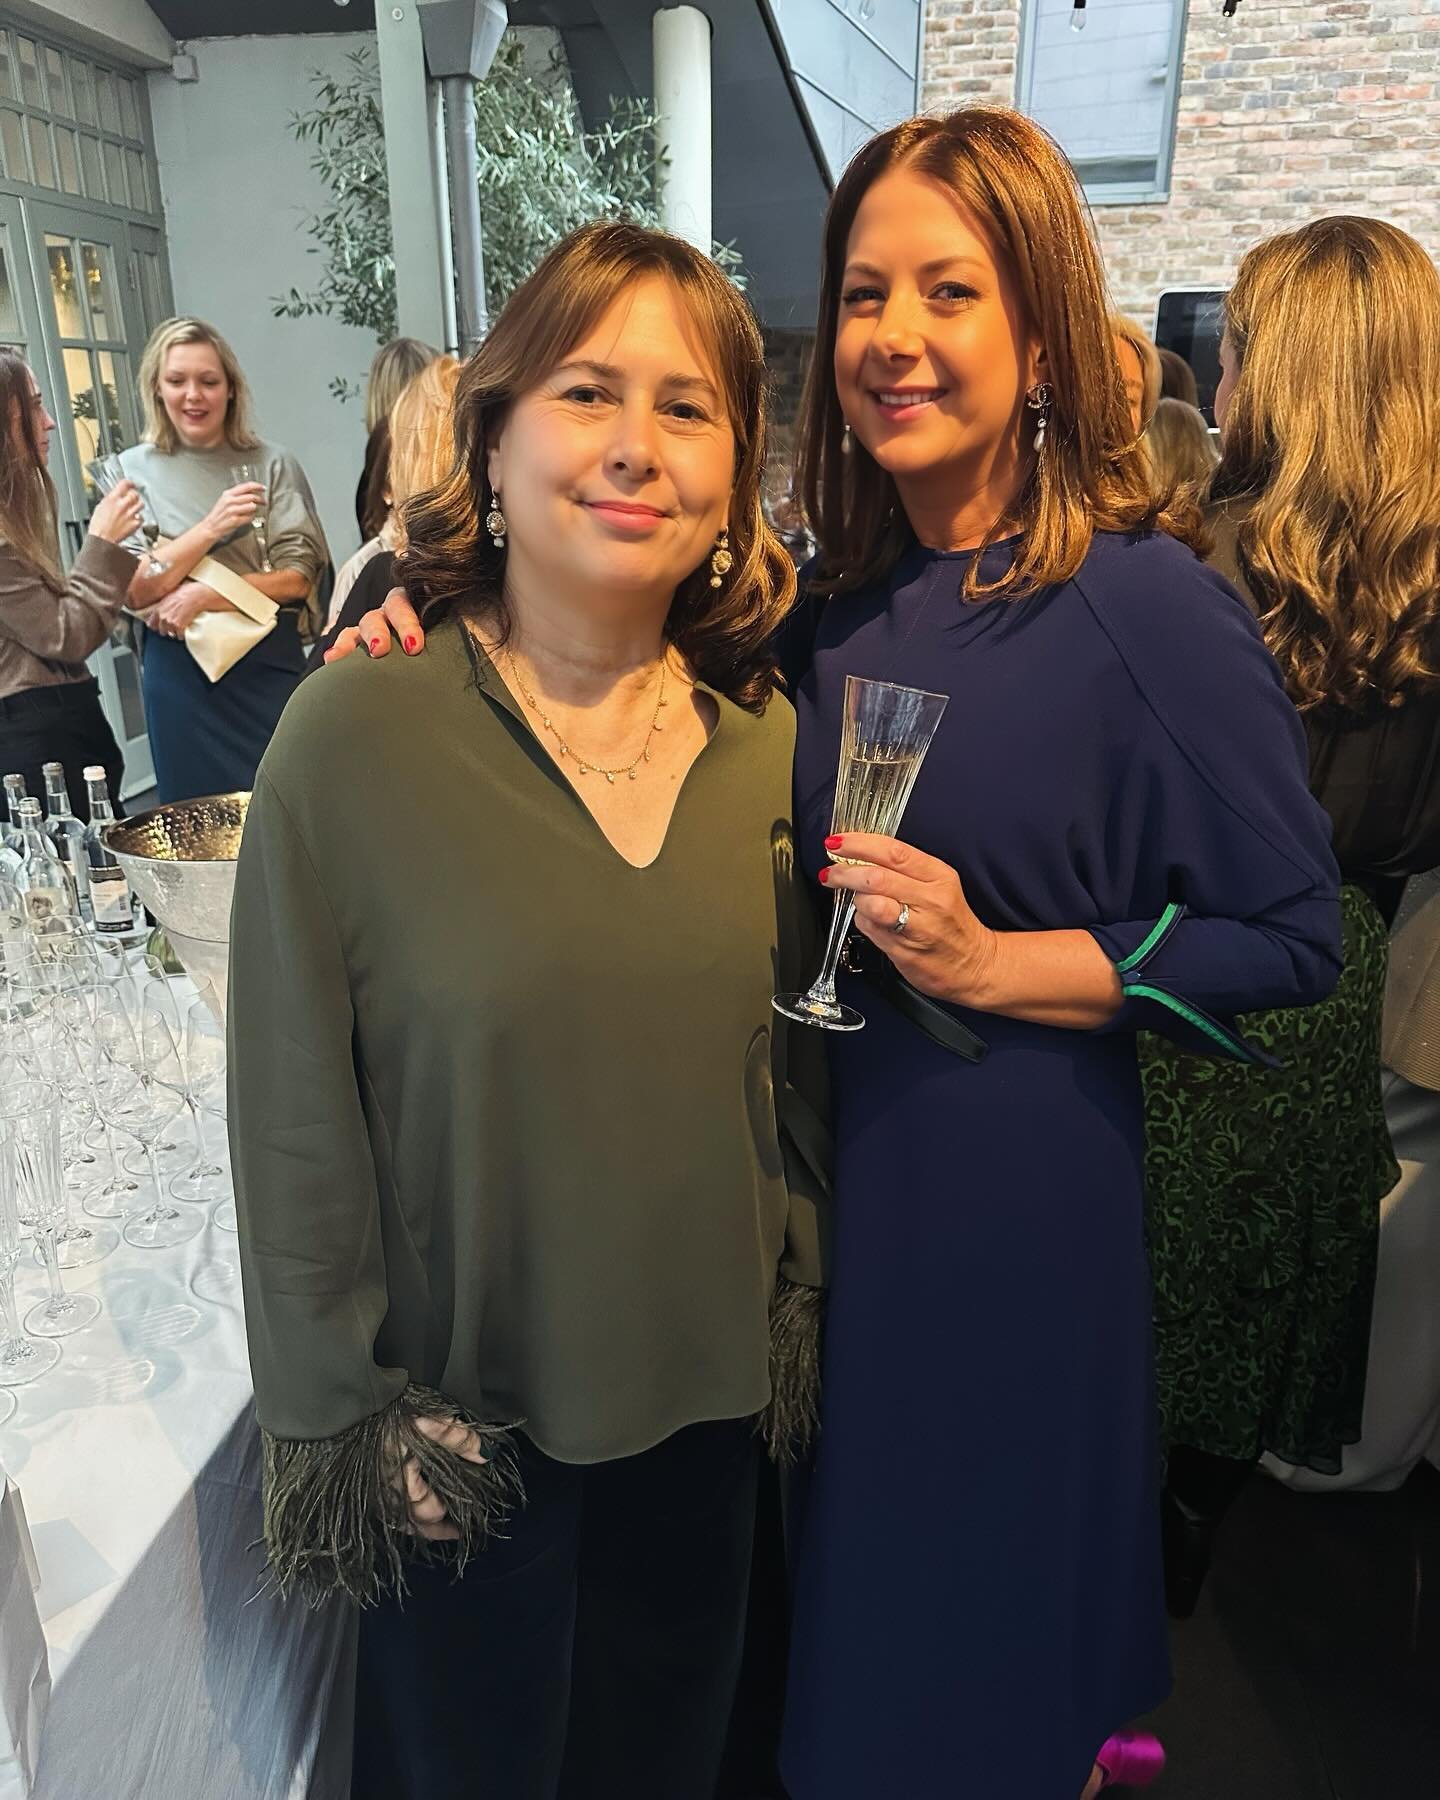 What a fabulous evening yesterday at the Dylan Hotel, soaking in insights on &lsquo;The Business of Luxury&rsquo; from the legendary Alexandra Shulman, former Editor-in-Chief of British Vogue! 🌟 It was great to reconnect with Alexandra after she pre